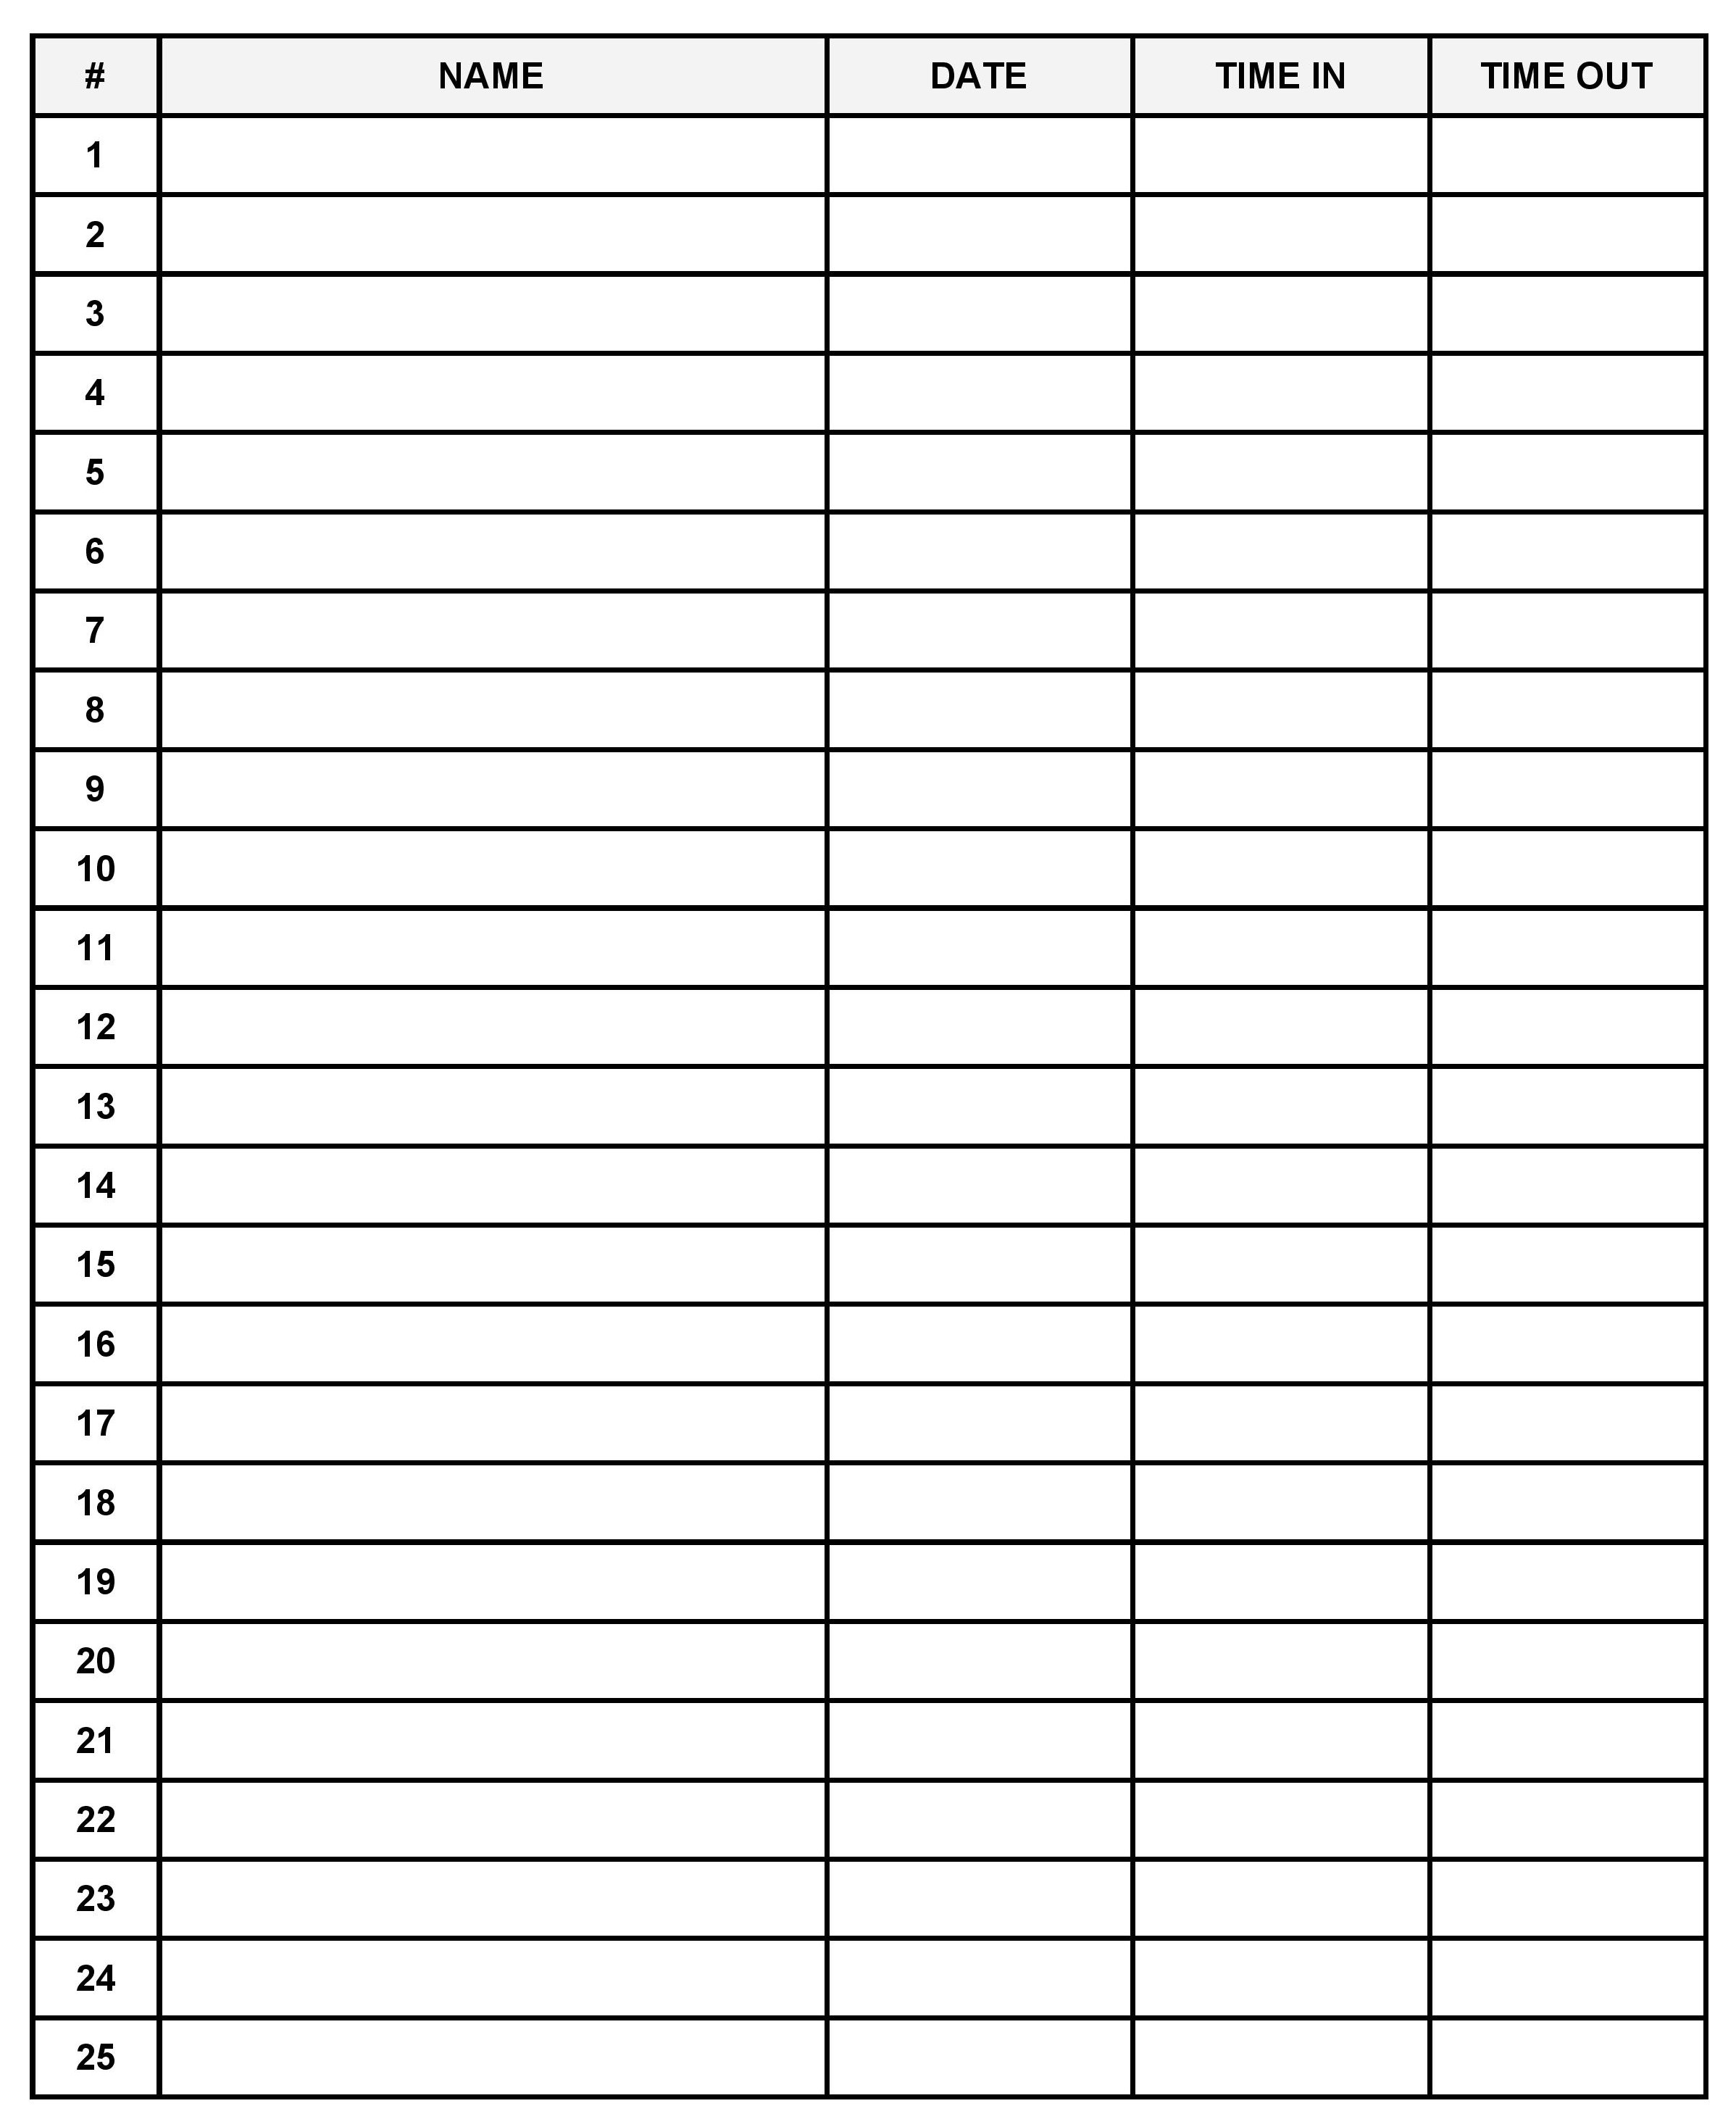 Excel Sign In Sheet Template from www.atyourbusiness.com